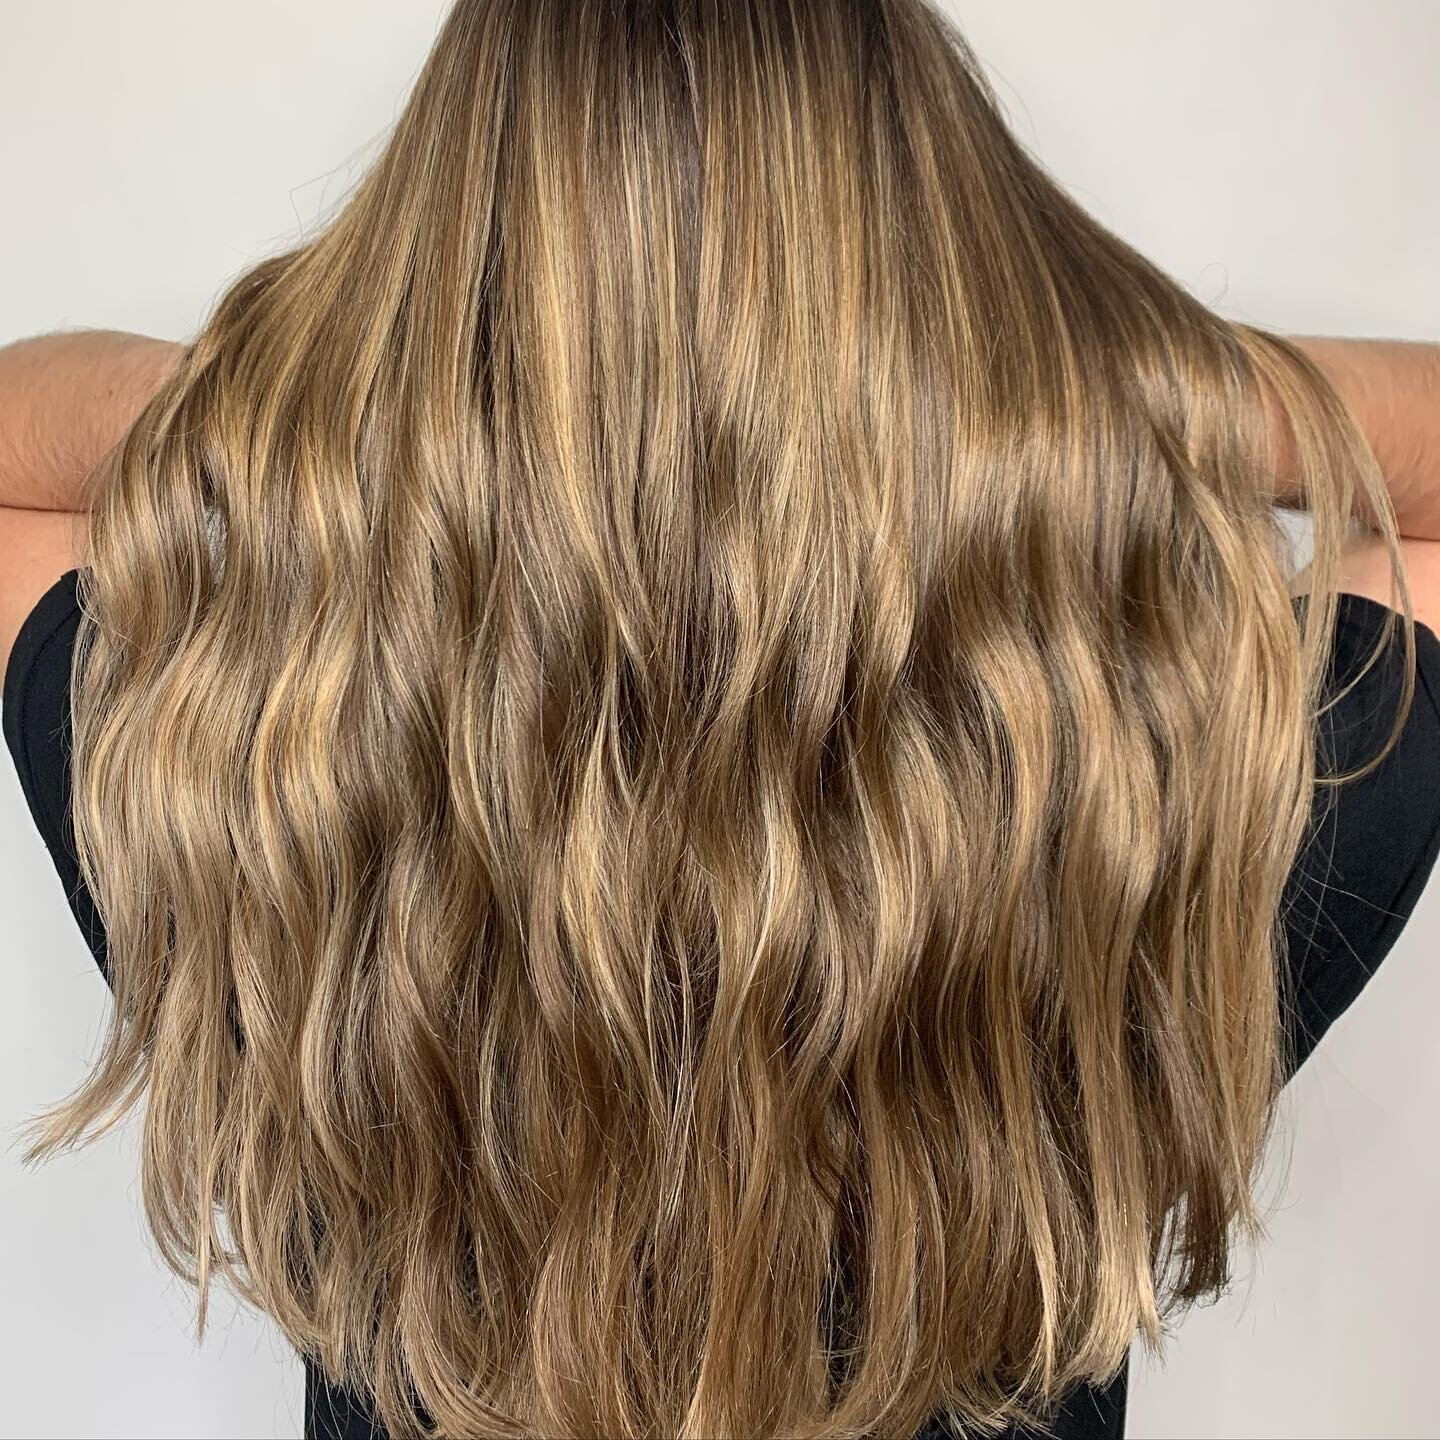 Thank you @taywillett for letting me play with your hair! #stlstylist #stl #stlbalayage #hair #balayage